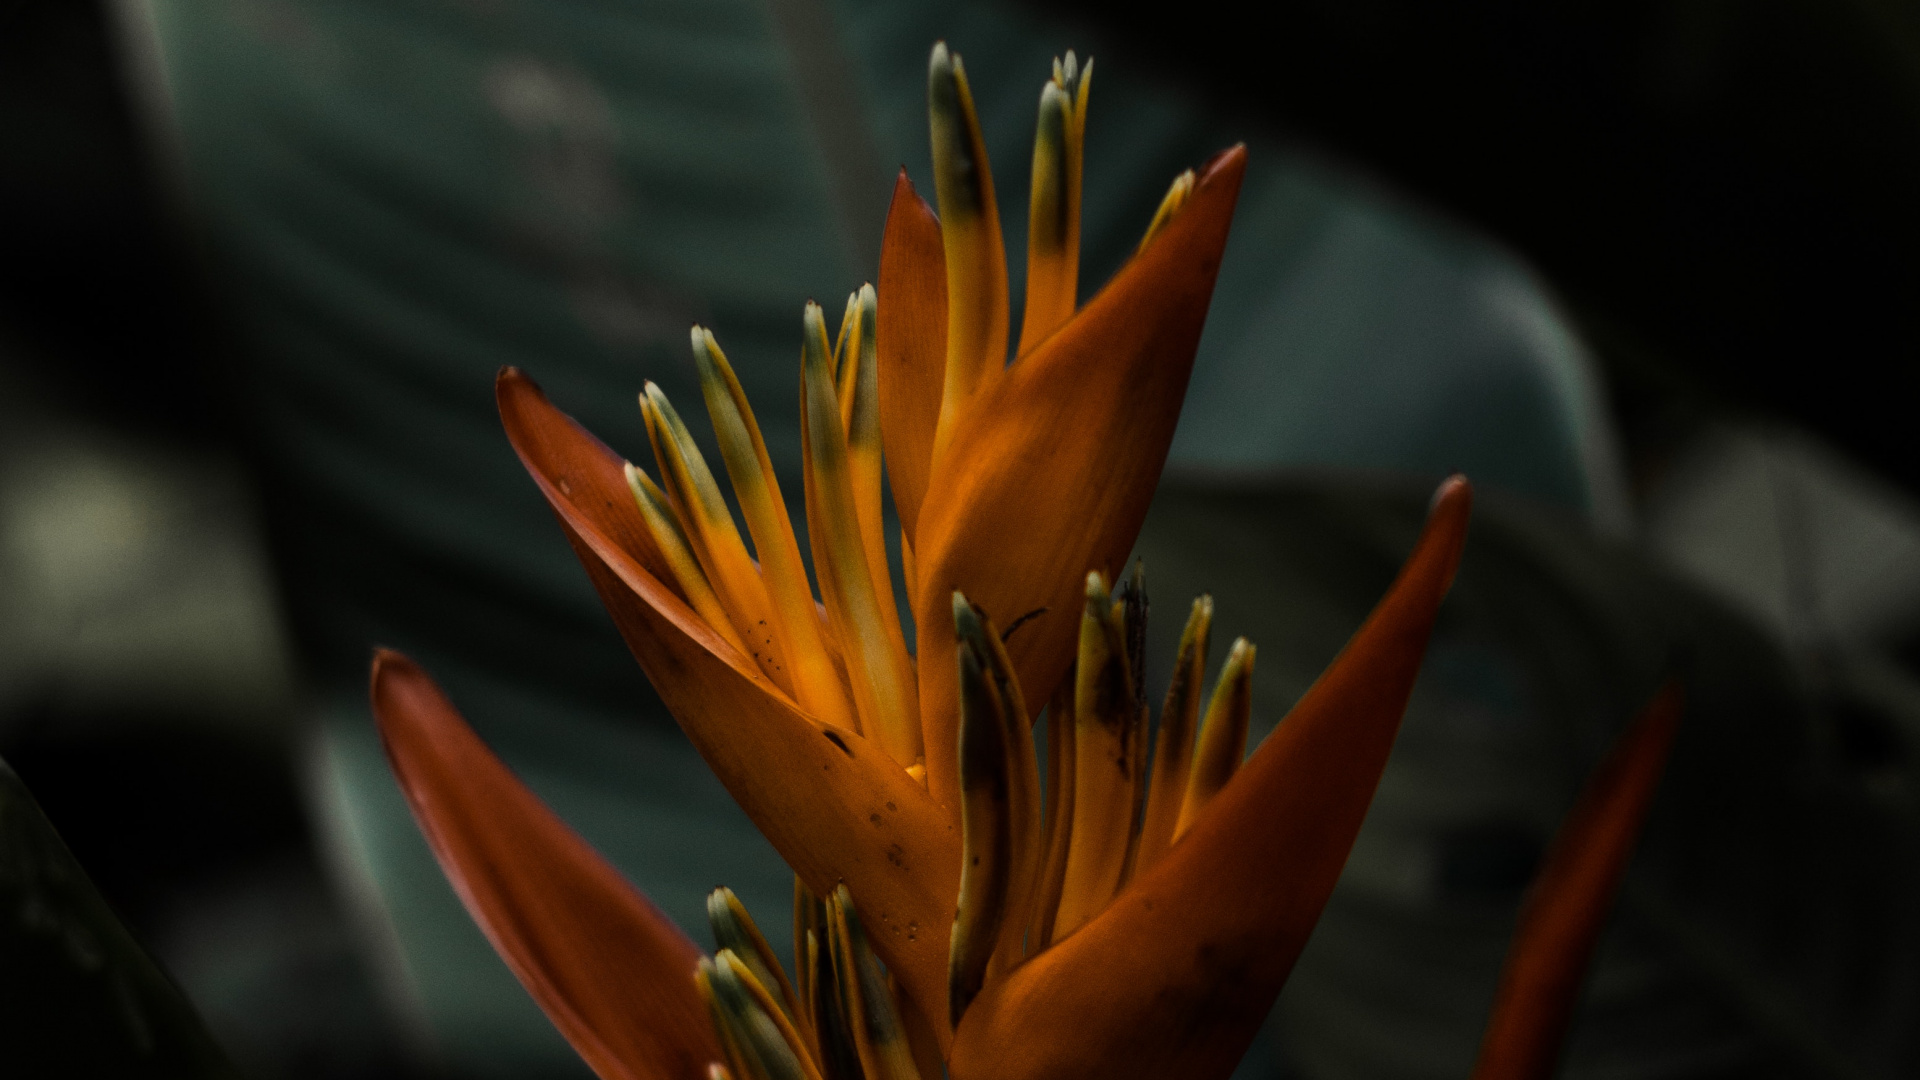 Orange Flower in Close up Photography. Wallpaper in 1920x1080 Resolution